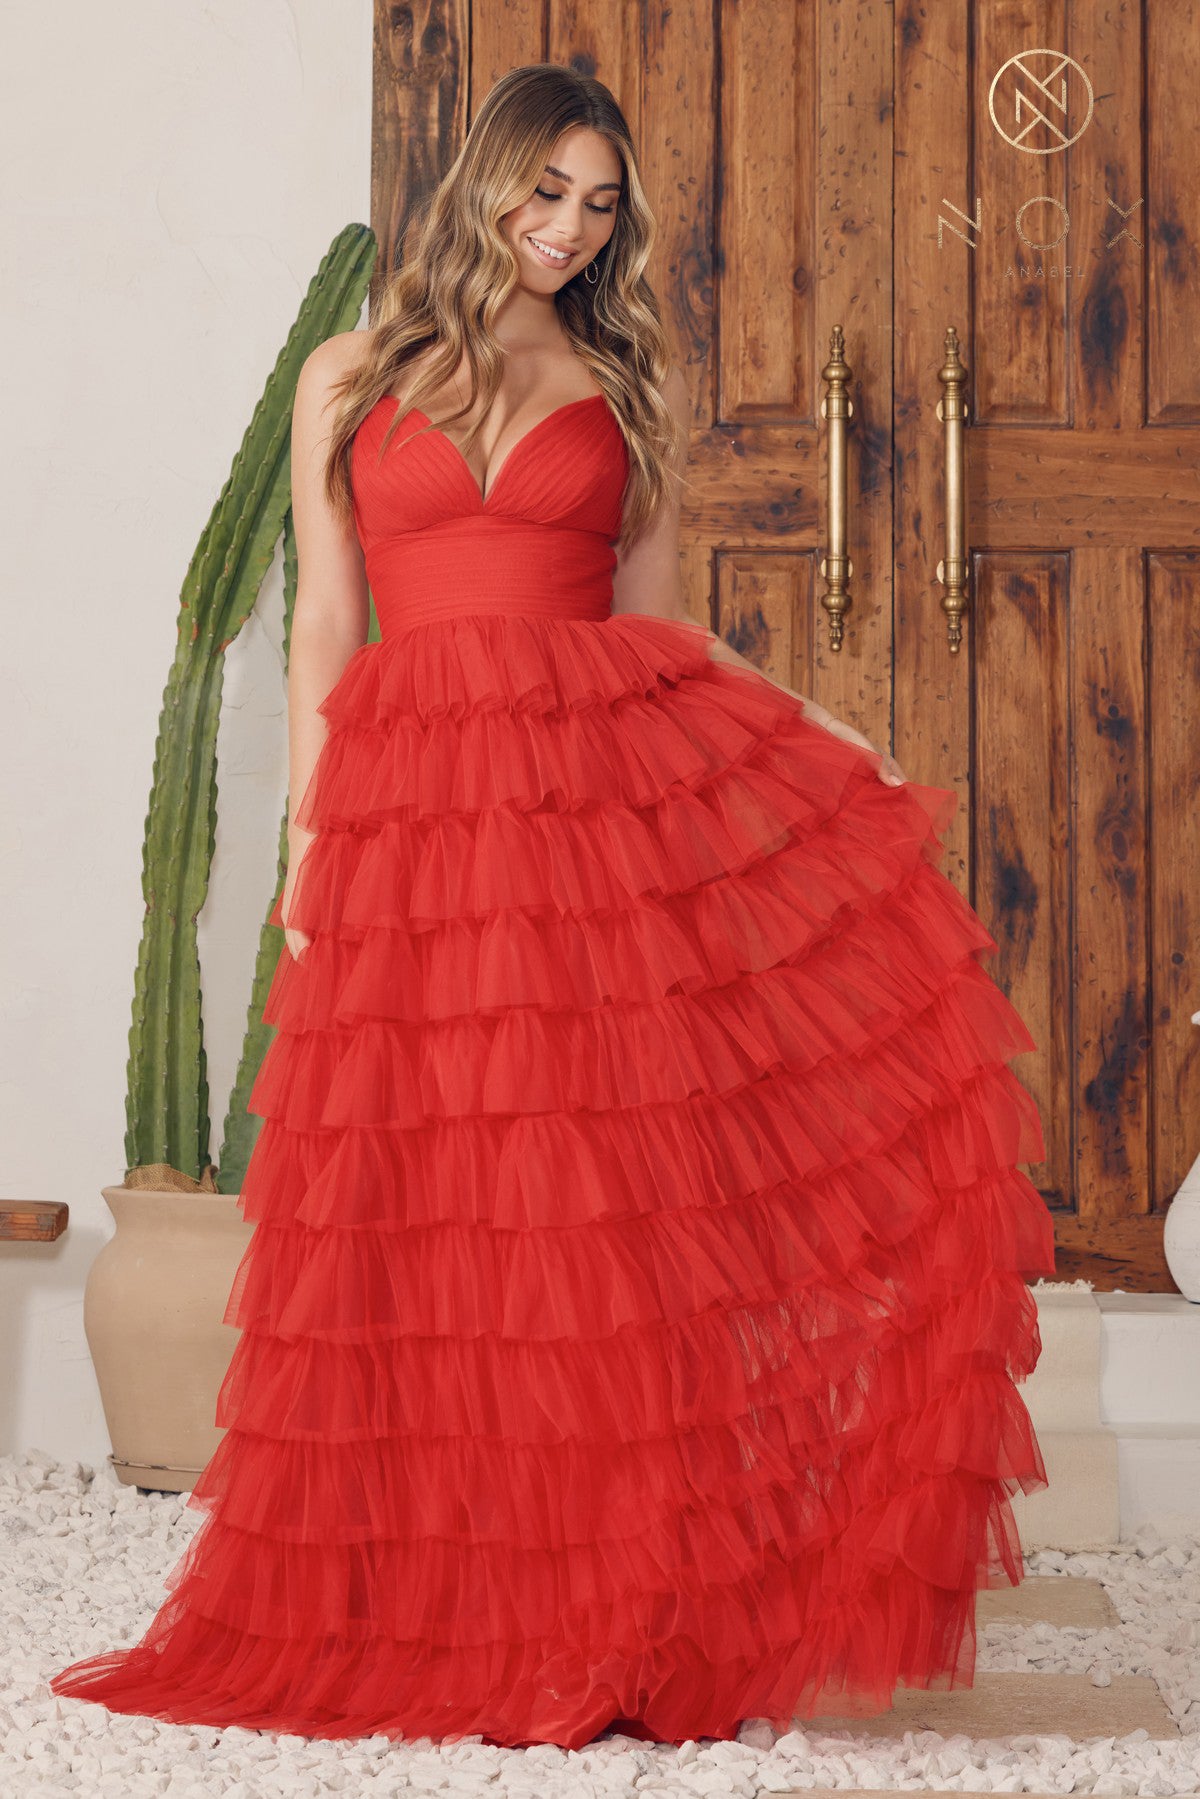 Available in red or black. Exquisite tulle gown that exudes elegance and charm. This stunning piece features beautifully ruffled layers that add depth and dimension to the overall design. A flattering V-neckline, coupled with delicate spaghetti straps, completes the look and creates a cohesive and sophisticated effect. Fabric: 100% Satin.